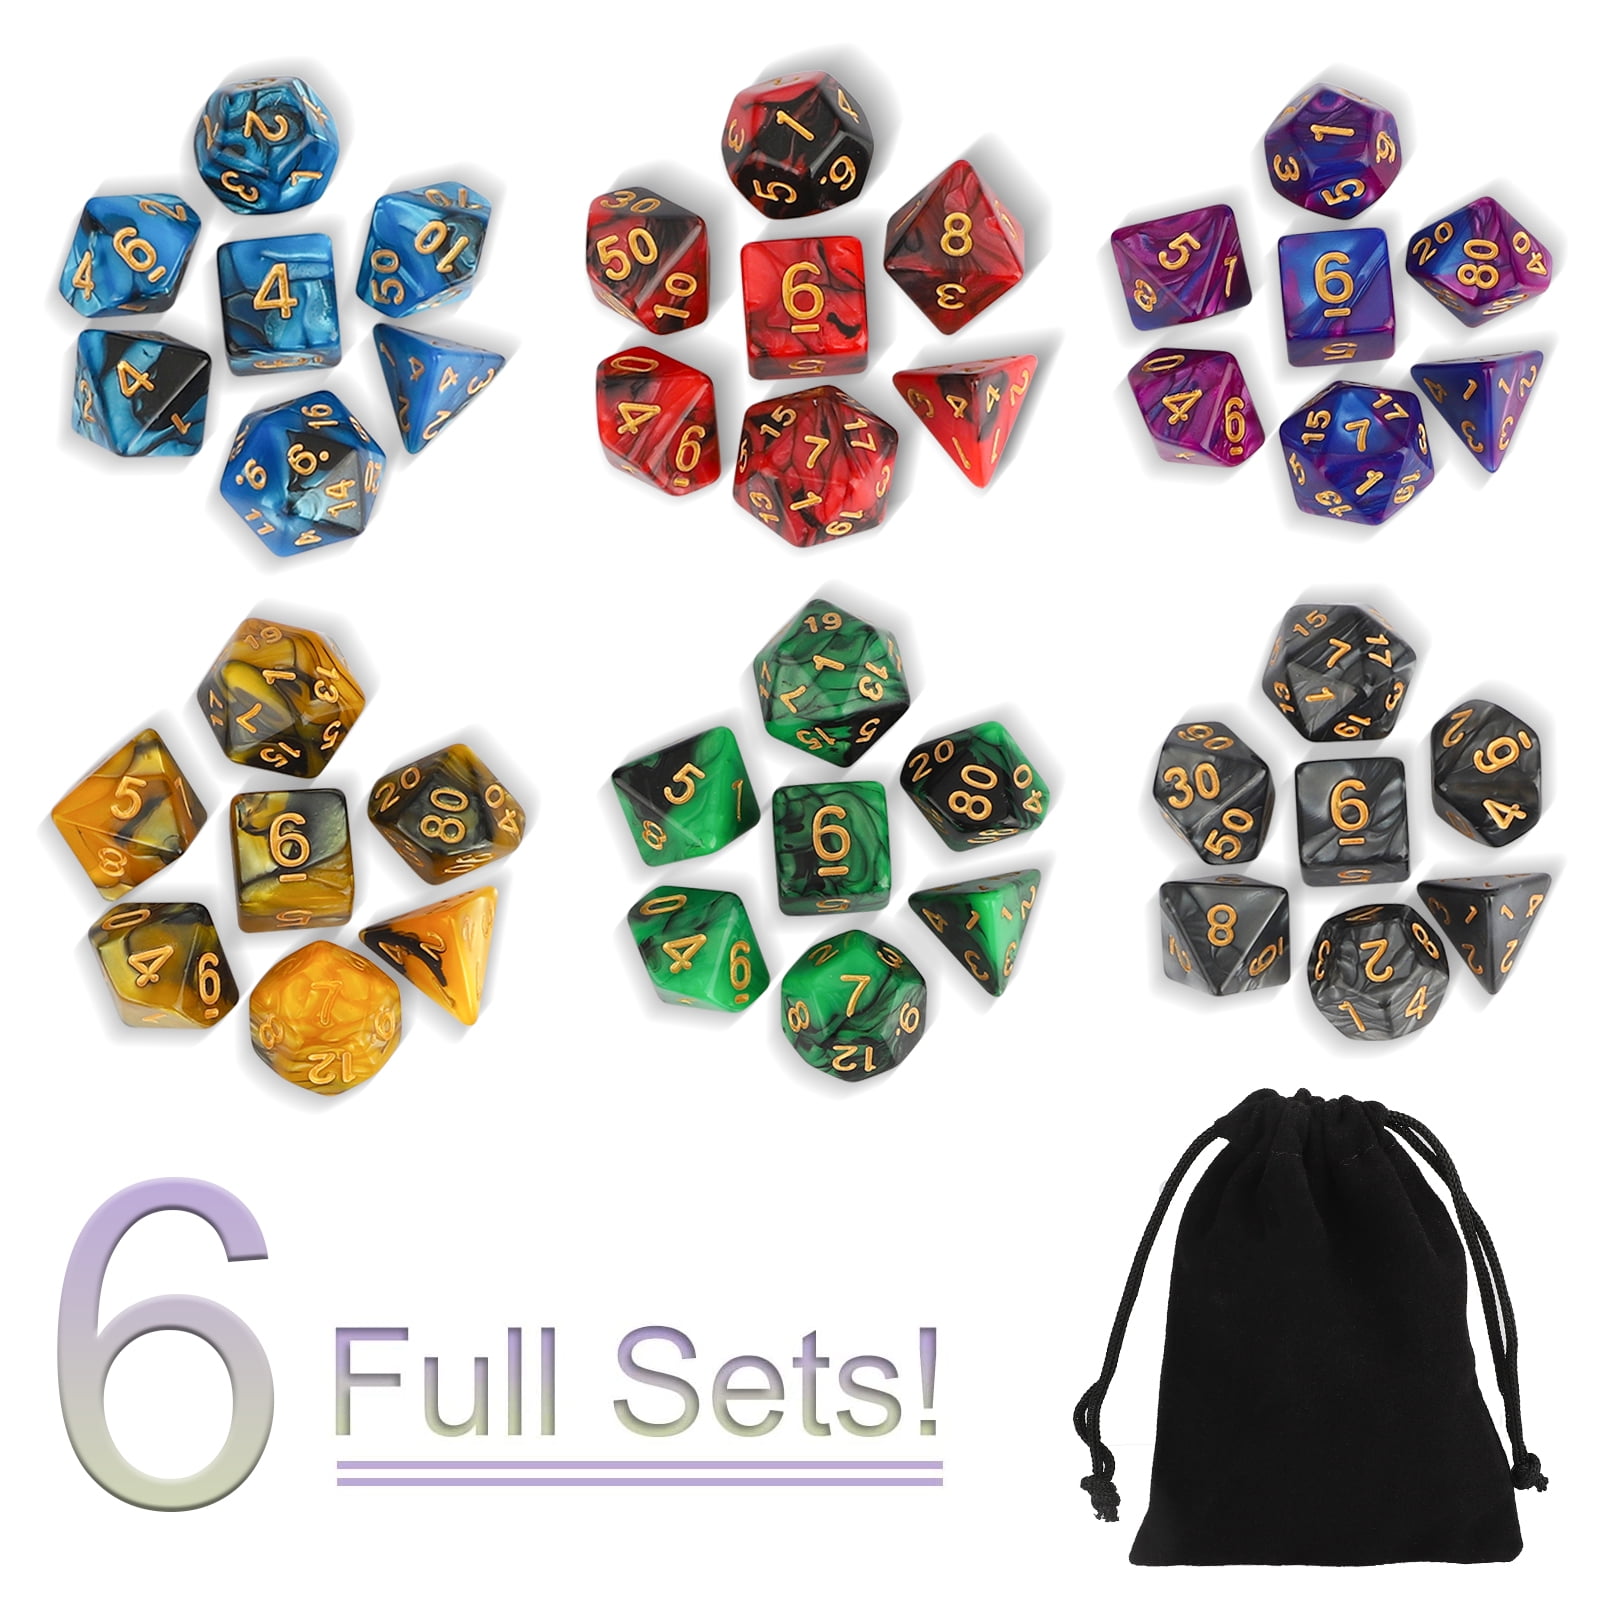 DND Dice 42X Dungeons and Dragons Dice w/Bags FOR MTG RPG DND D20 D12 D10 D8 D4 